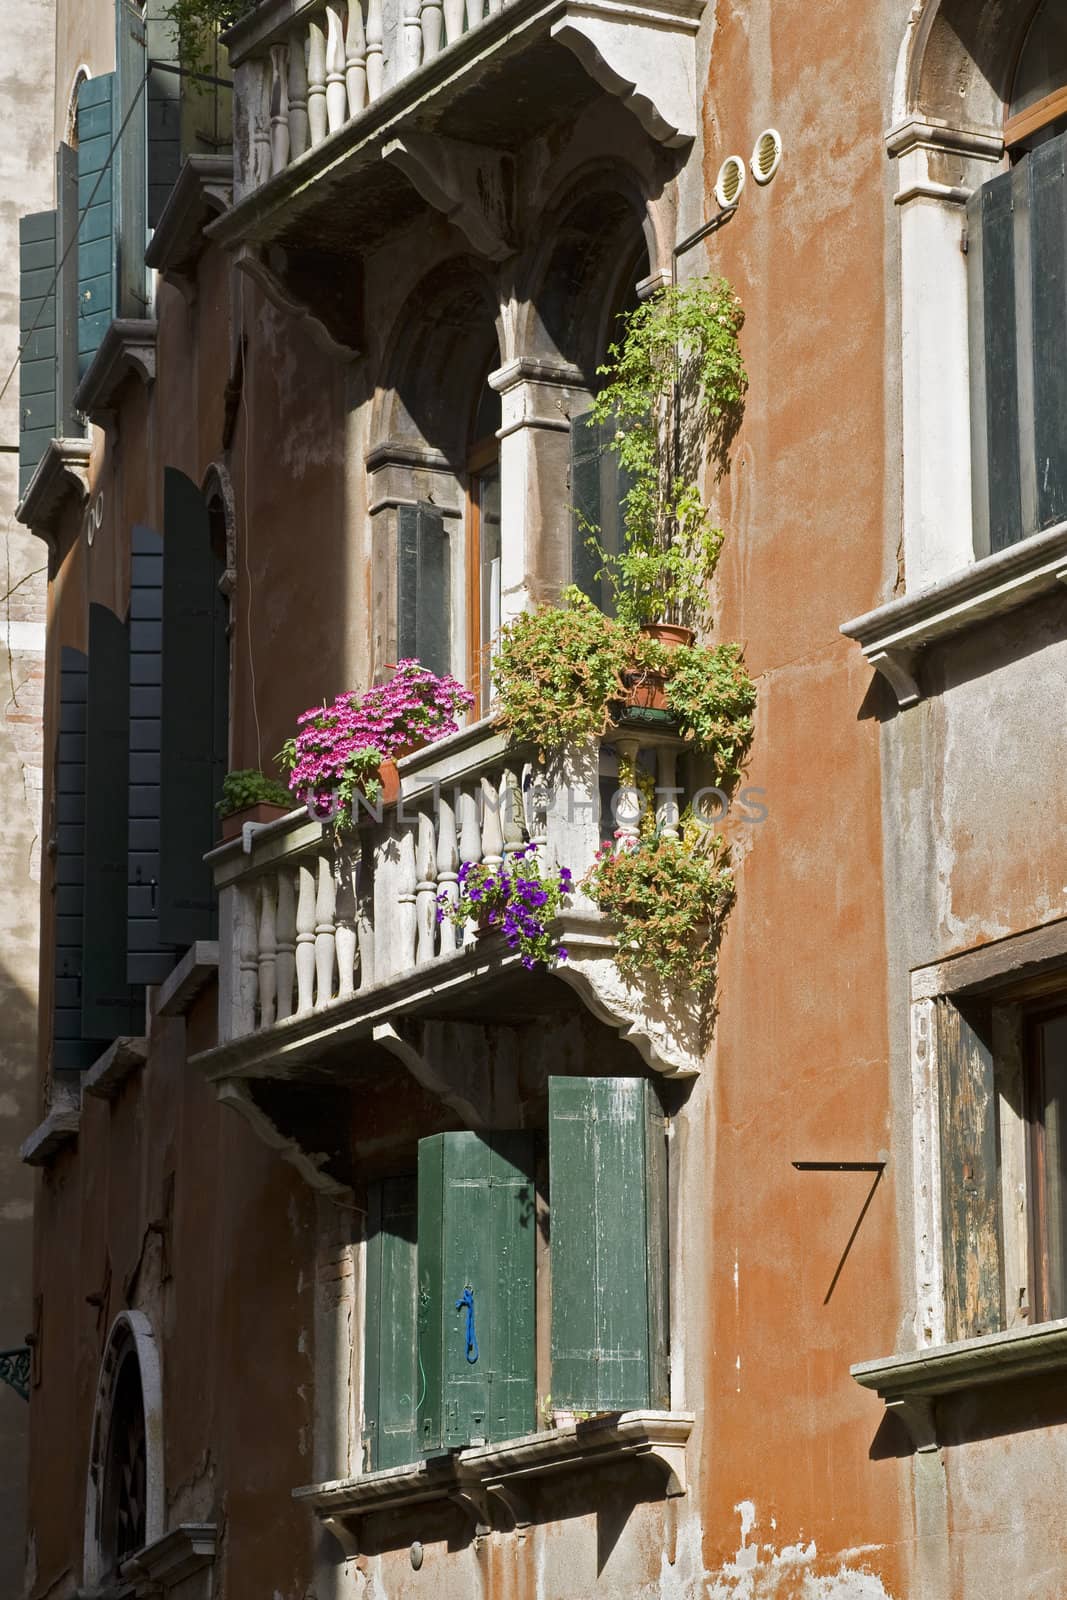 A small balcony with flowers on a typical Italien house. Location: Venice, Italy